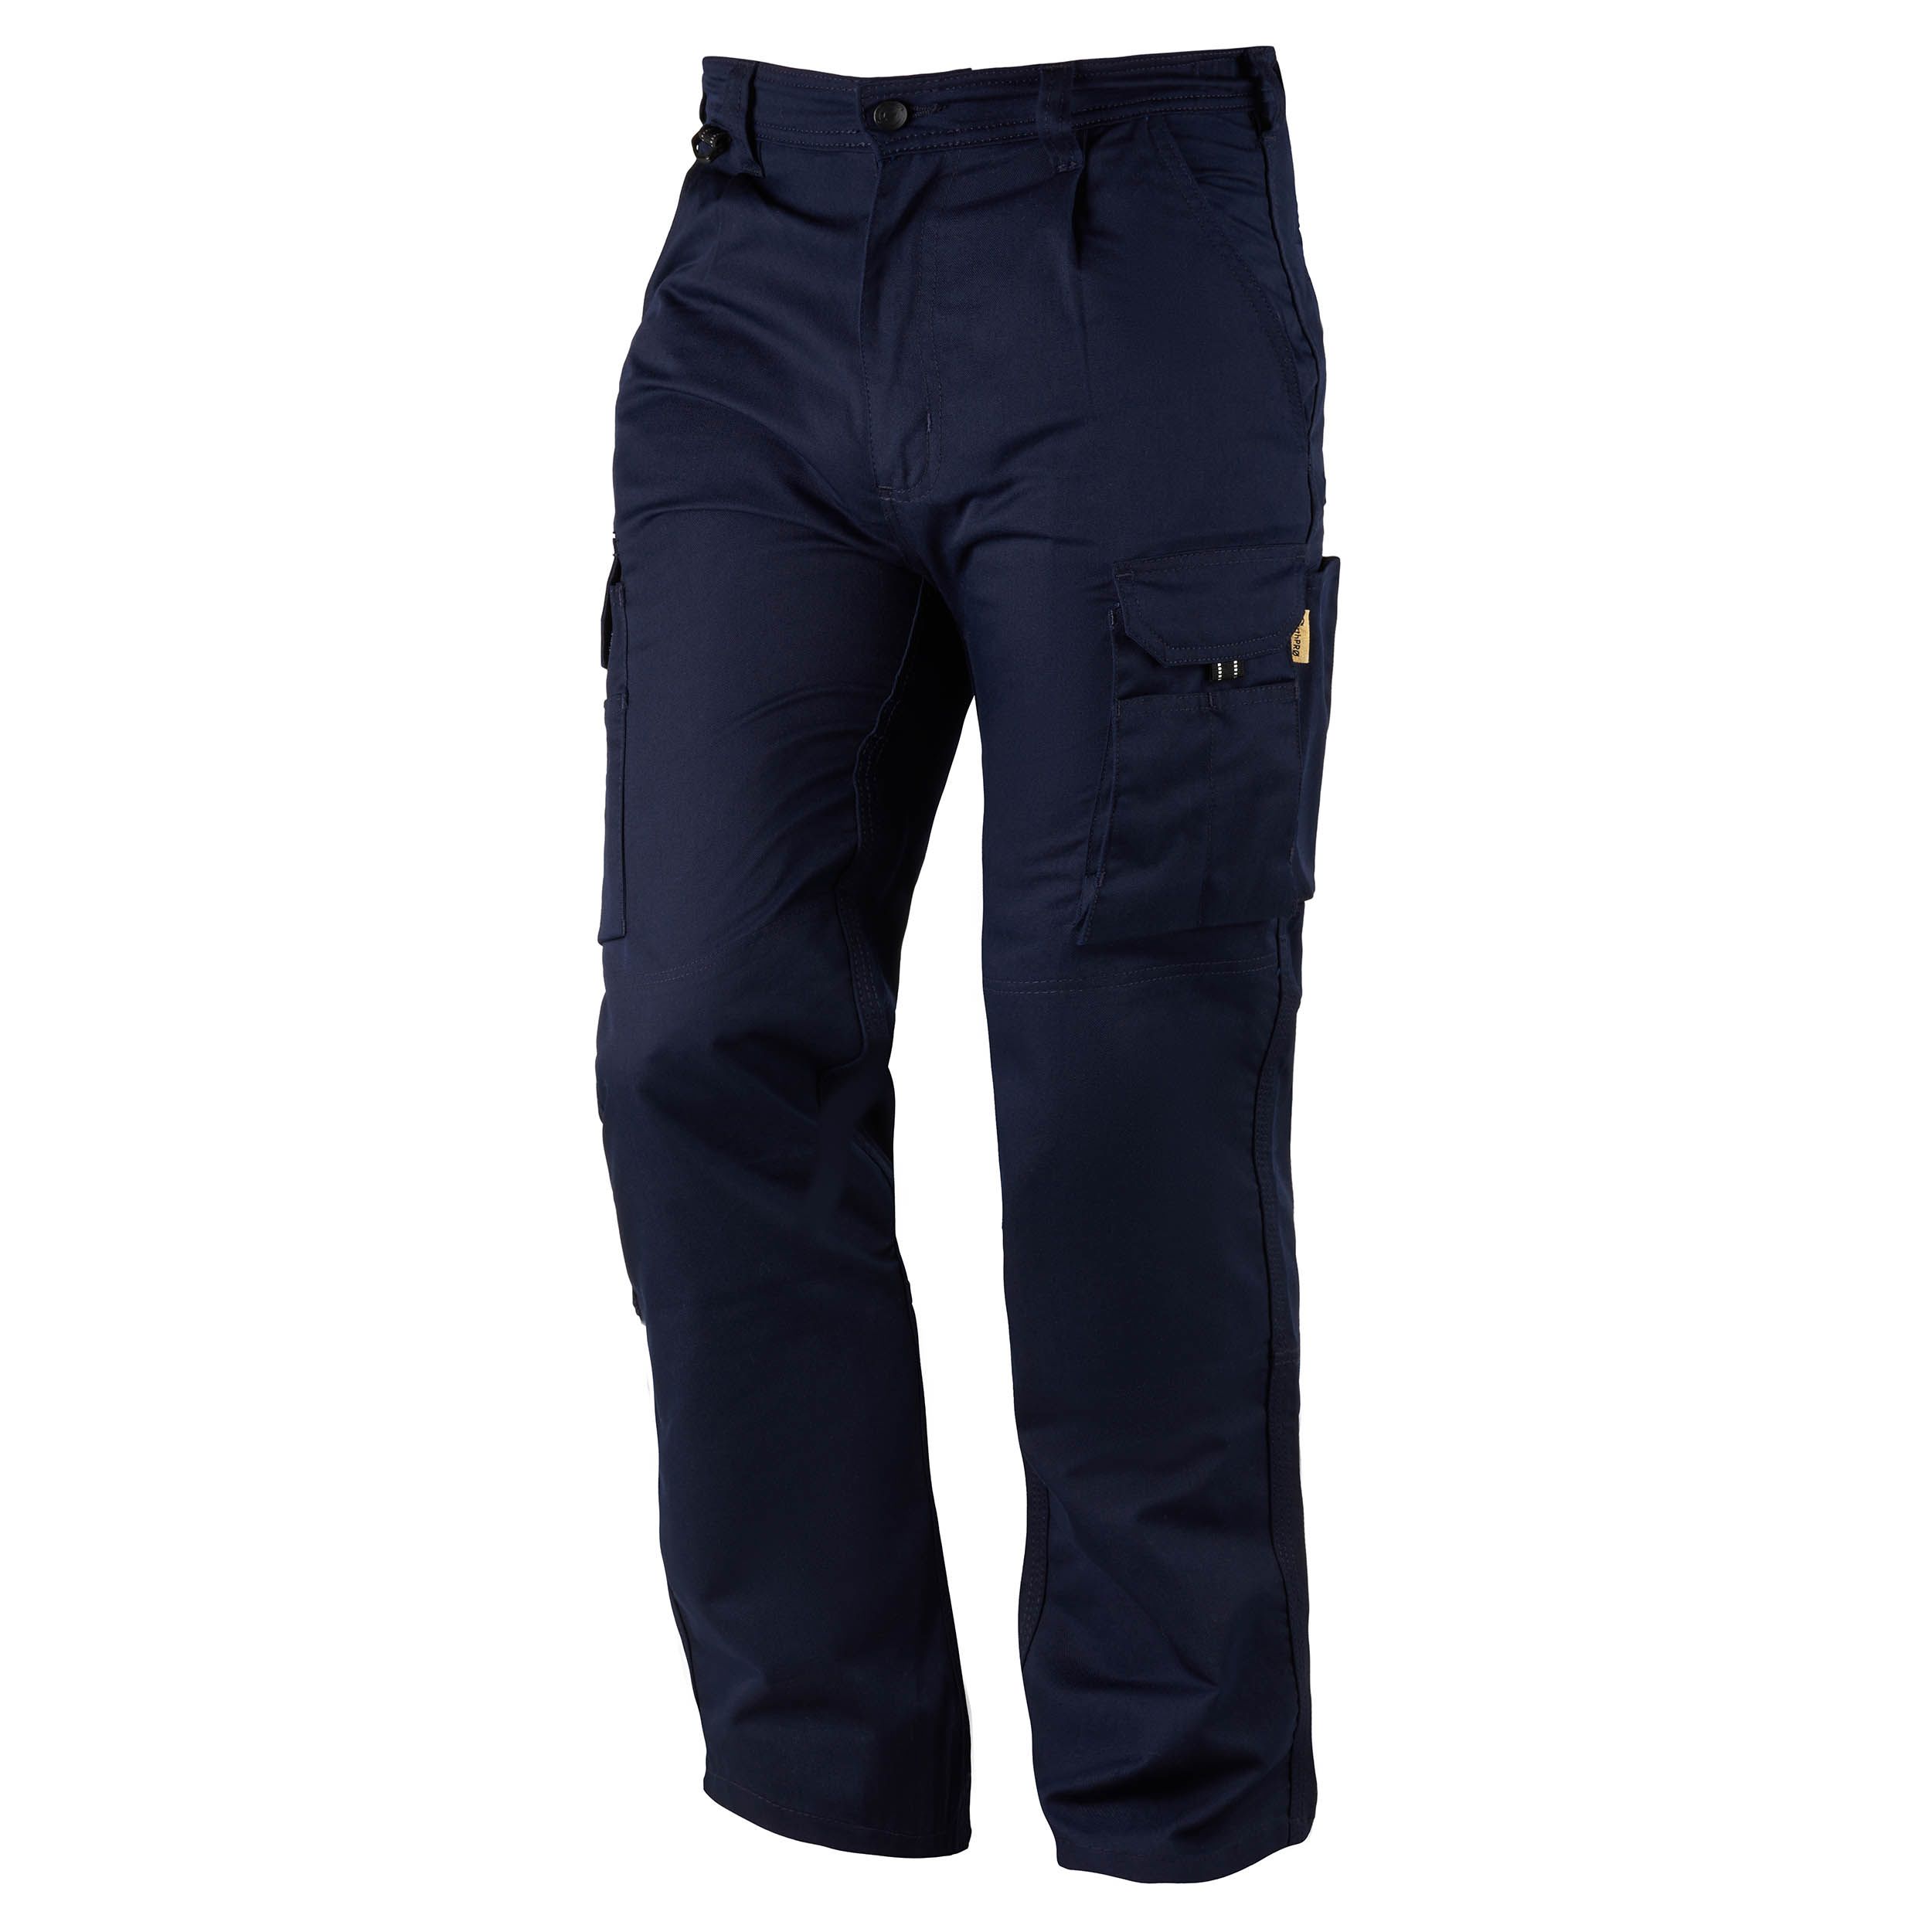 Orn Hawk EarthPro Combat Trouser Navy Men's Cotton, Recycled Polyester Trousers 48in, 119cm Waist